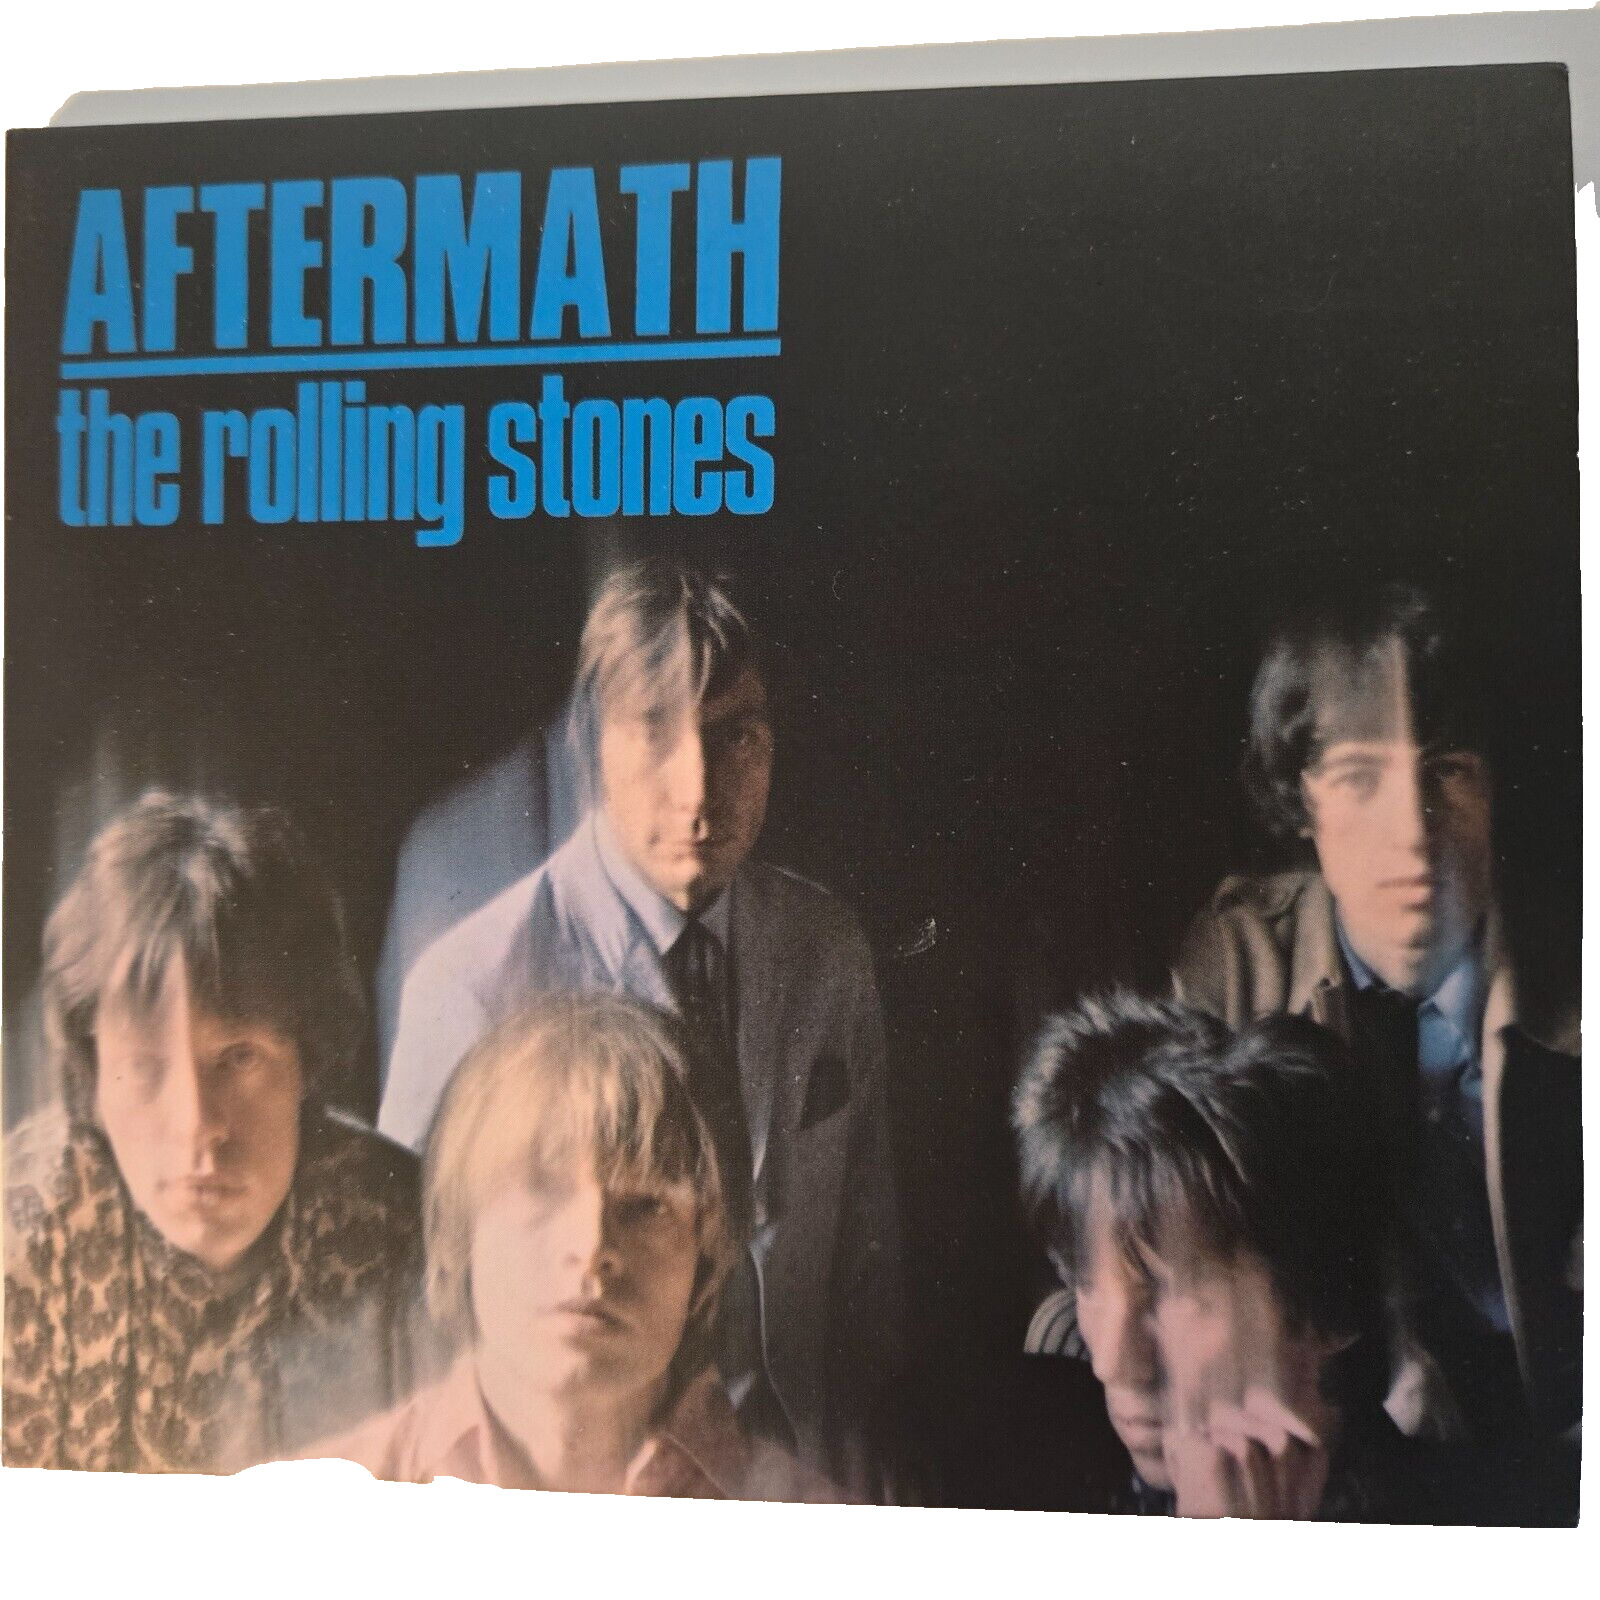 The Rolling Stones  Aftermath  74762 ABKCO 2002 CD Like New